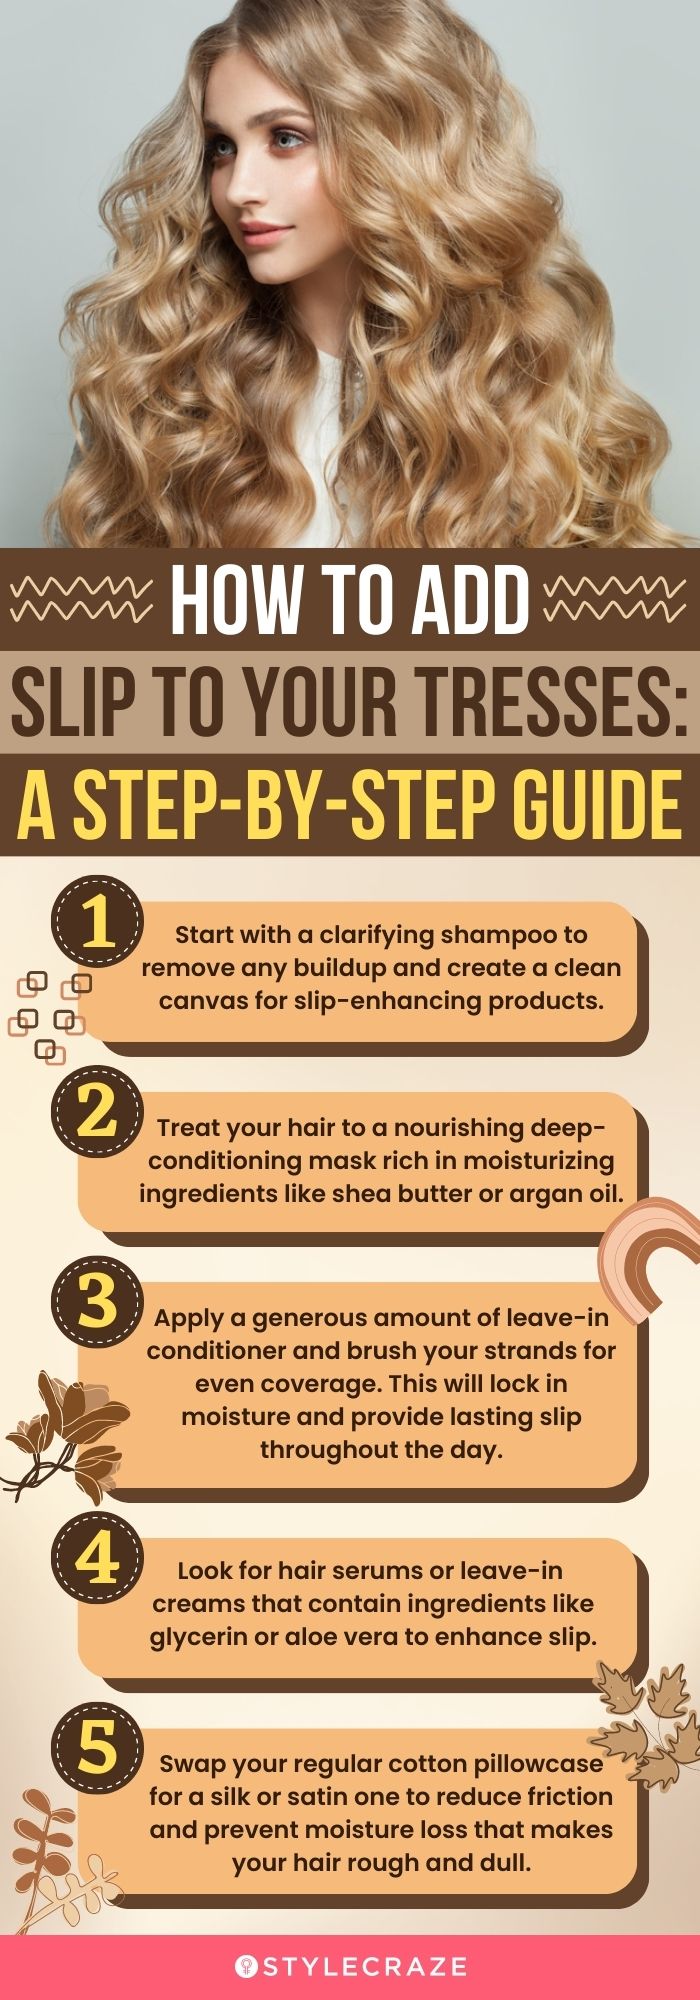 How To Add Slip To Your Tresses (infographic)